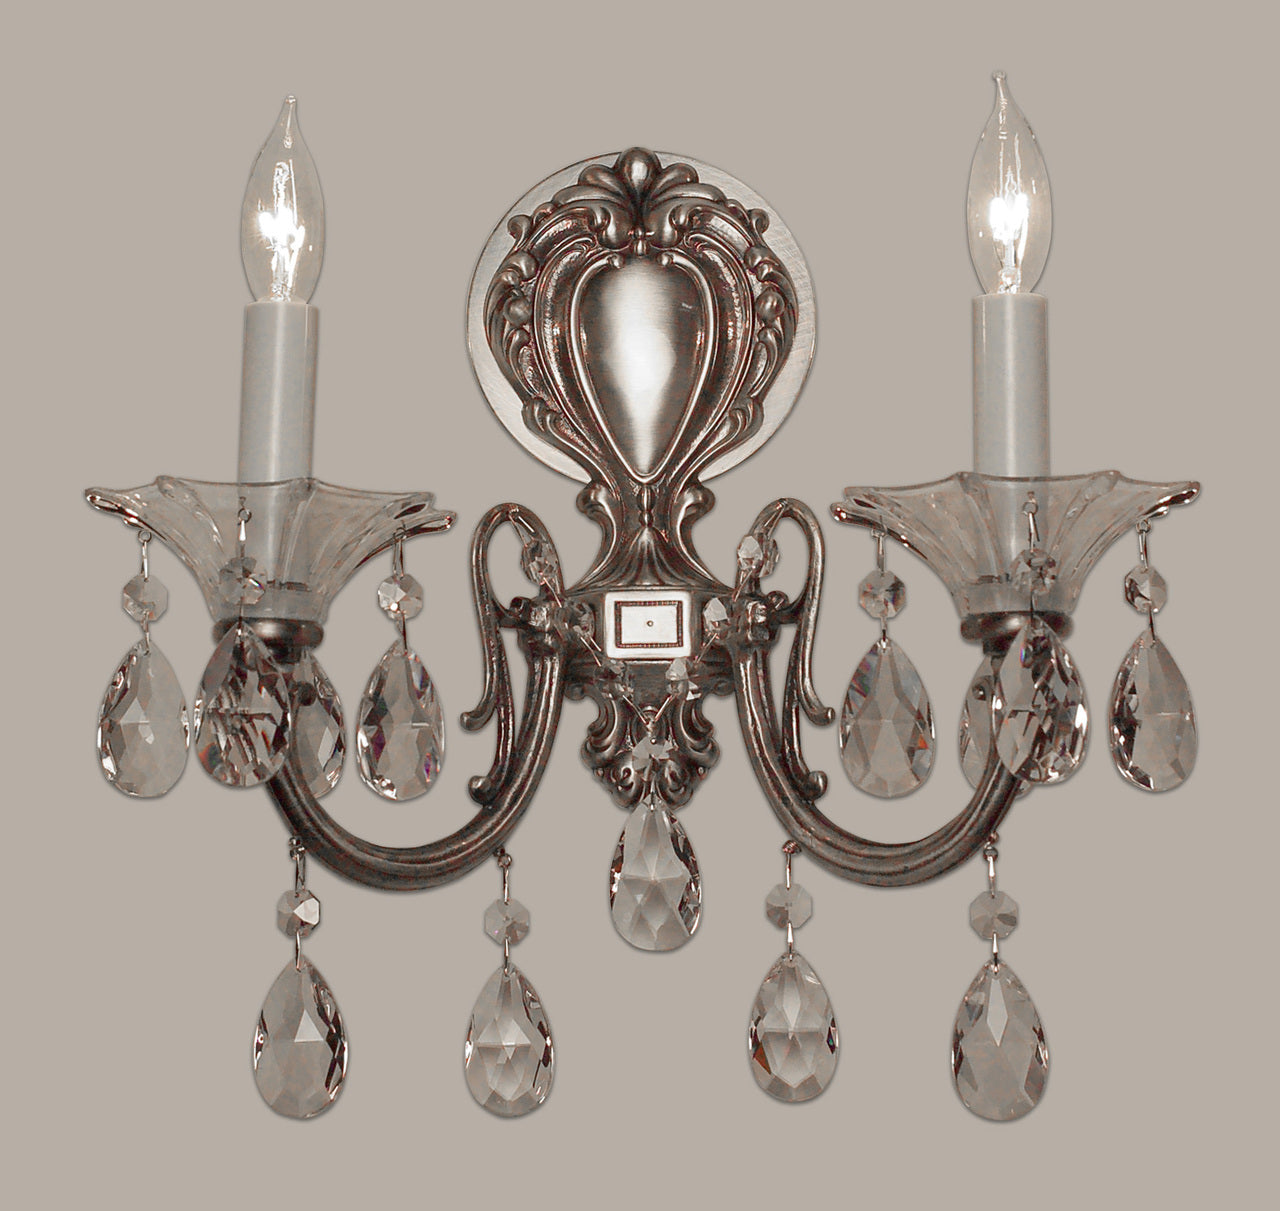 Classic Lighting 57052 MS S Via Lombardi Crystal Wall Sconce in Millennium Silver (Imported from Spain)